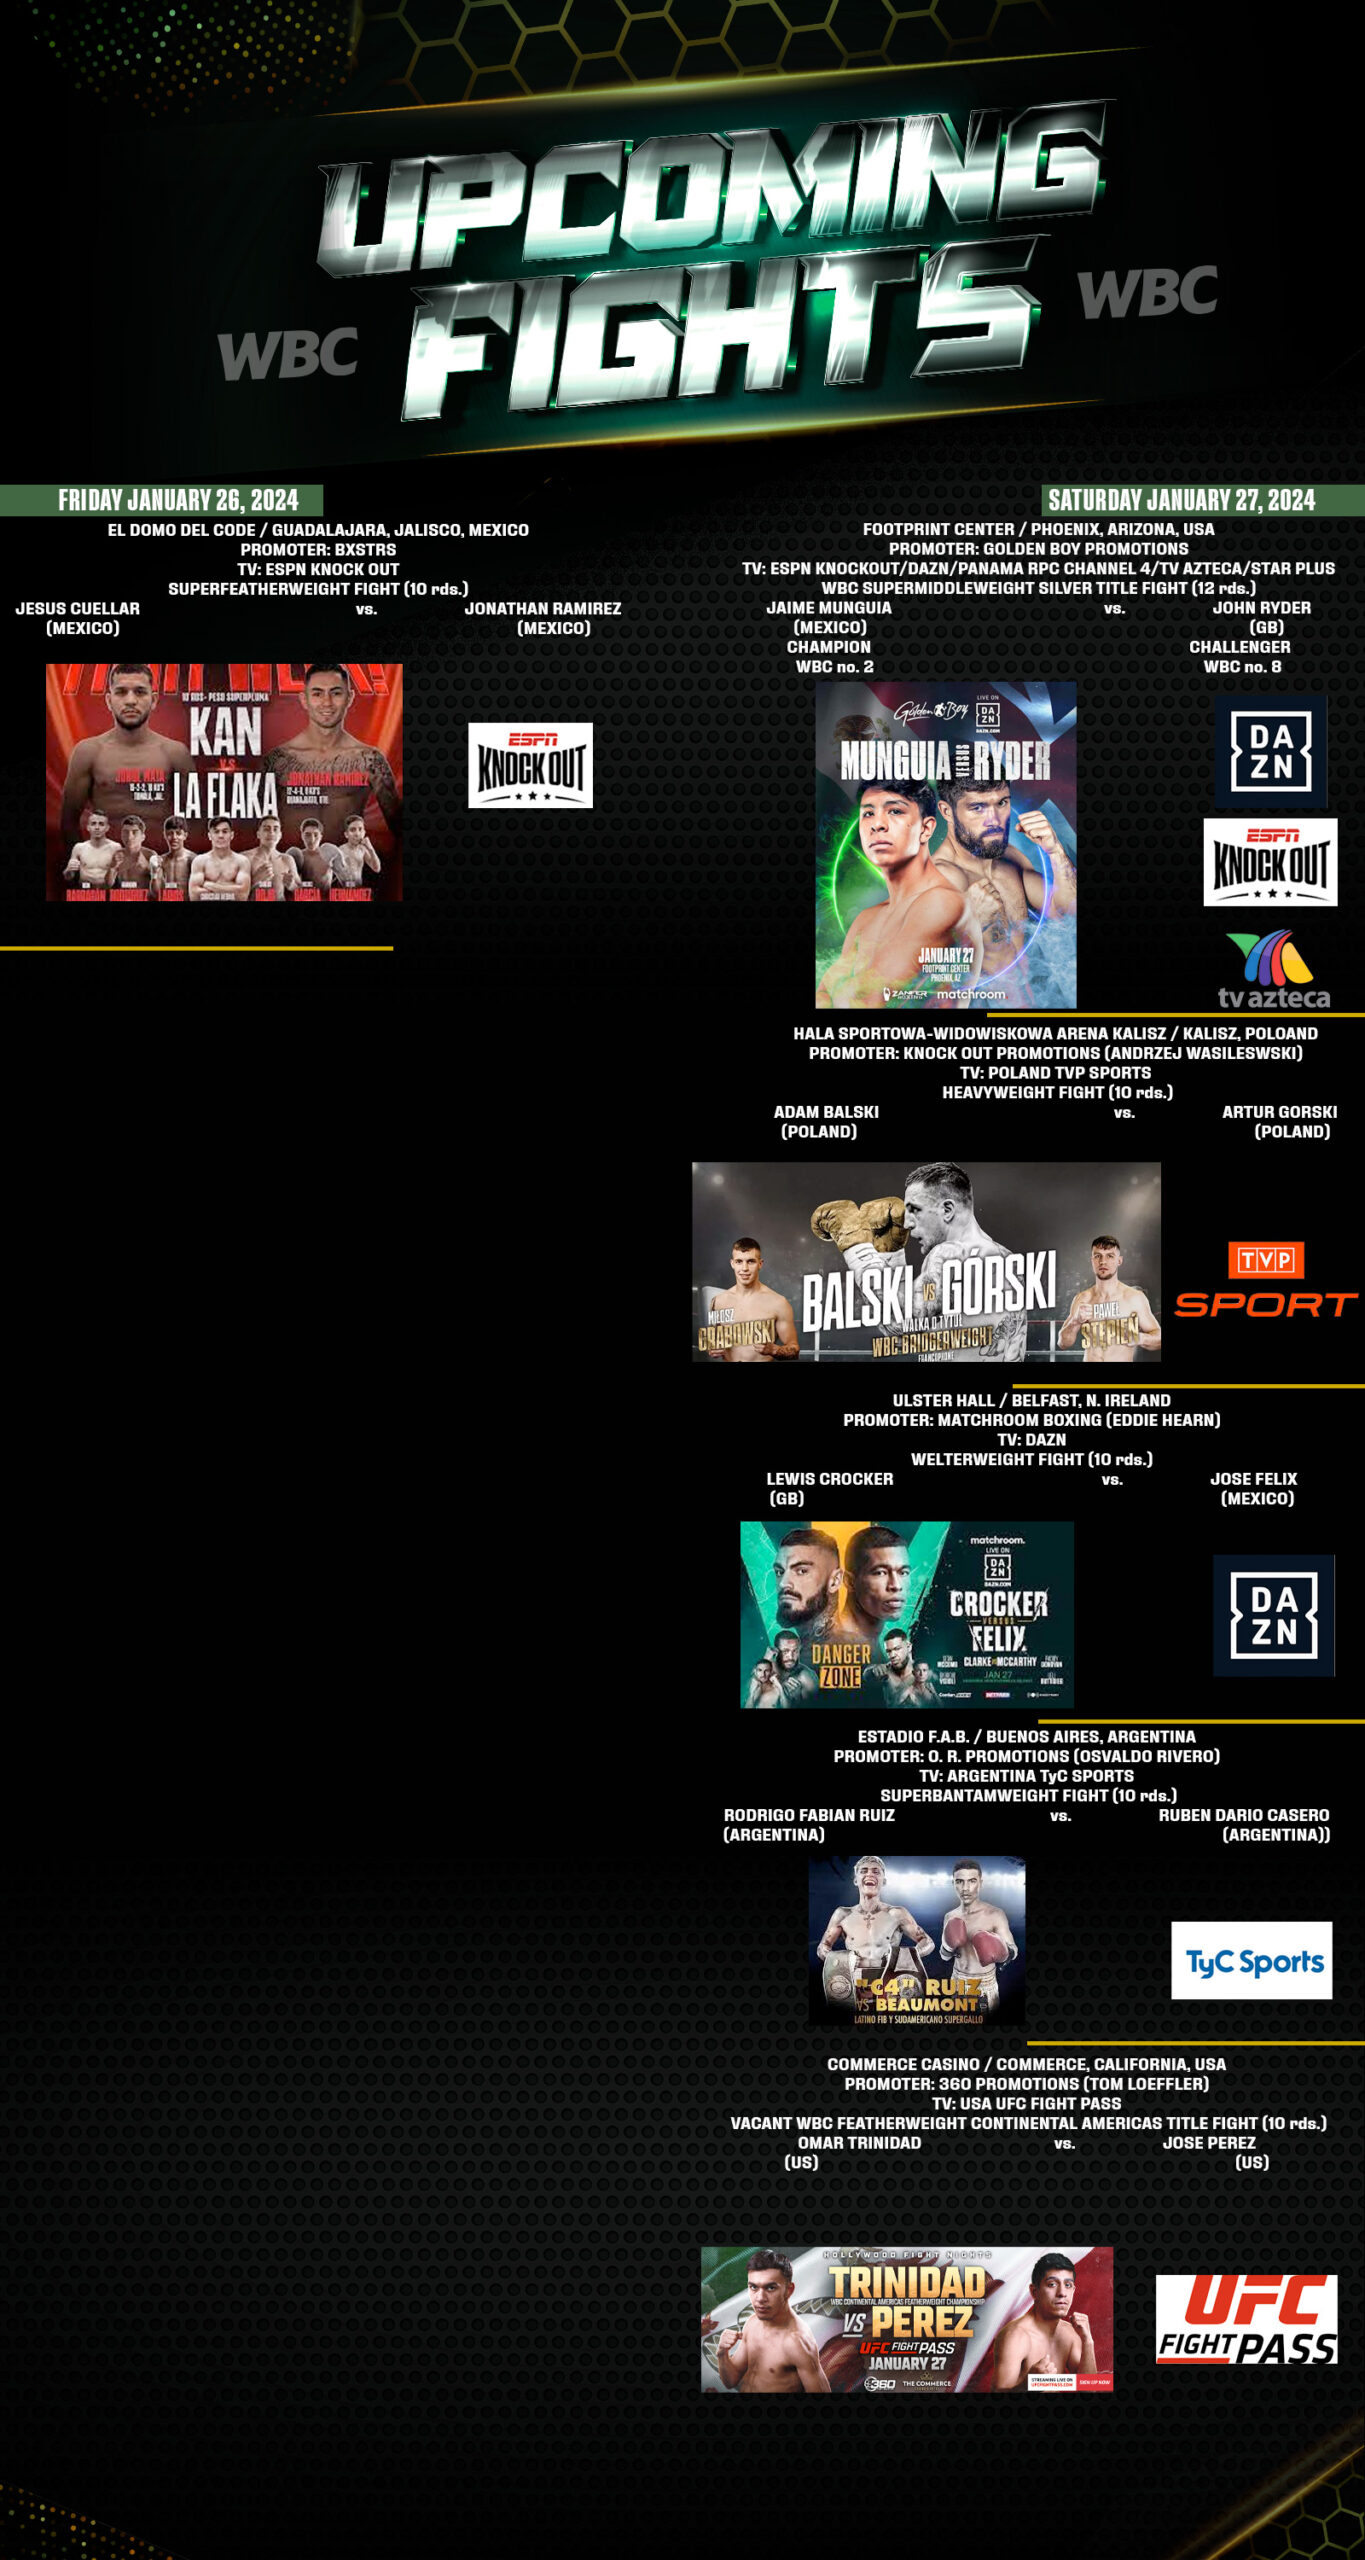 WBC Fight Schedule of the Week World Boxing Council